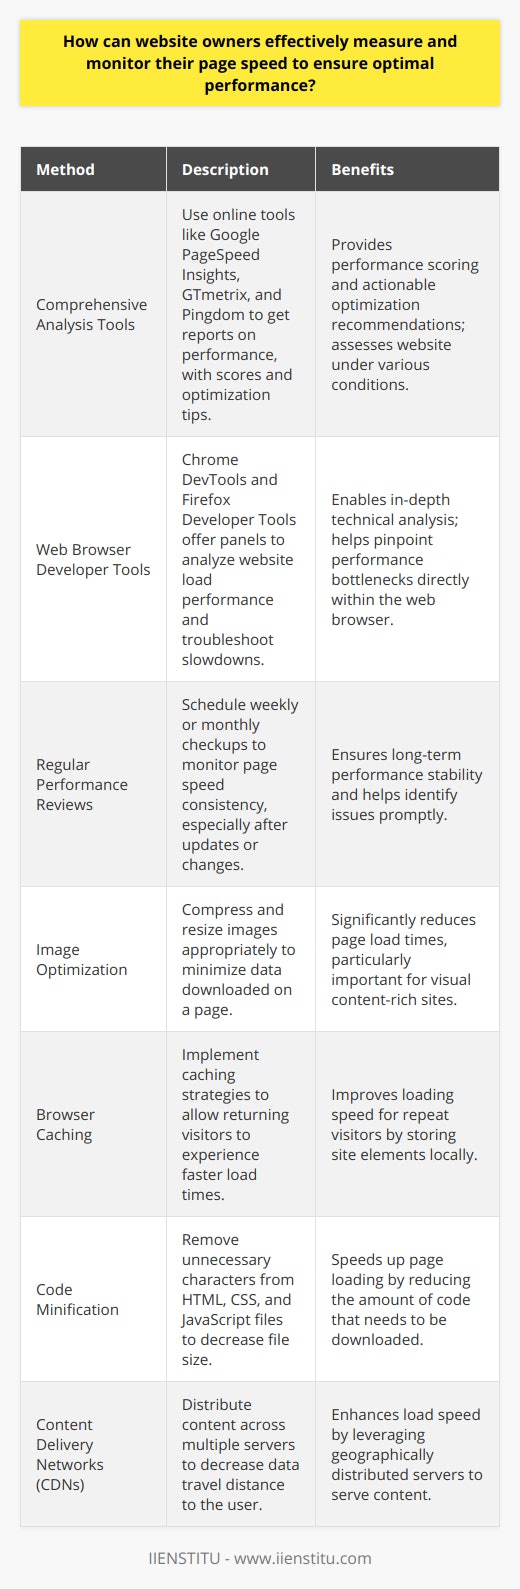 Optimal website performance is vital for user engagement and search engine ranking. Effective measurement and monitoring of page speed are critical to identifying areas for improvement and ensuring that visitors have a smooth experience. Here are the steps and methods website owners can use to measure and monitor their page speed effectively.Utilize Comprehensive Analysis ToolsSeveral online tools provide extensive reports on website speed performance, assessing not just the load time but also giving insights into what can be improved. These tools perform various tests to evaluate how the website performs under different conditions and provide both a performance score and actionable recommendations.Google PageSpeed Insights is a popular choice that scores both mobile and desktop versions of a site, offering optimization suggestions for each. Tools like GTmetrix and Pingdom also provide detailed performance reviews, including page size, load time, and performance insights based on several metrics.Leverage Web Browser Developer ToolsModern web browsers such as Chrome and Firefox come with integrated developer tools that are useful for diagnosing performance issues on websites. Chrome DevTools, for instance, has a 'Performance' panel which allows website owners to record and analyze a website's load performance and pinpoint Javascript that is slowing down the page.Chrome's 'Lighthouse' audit is another feature that evaluates page performance, accessibility, and search engine optimization, among other metrics. Firefox Developer Tools offers similar functionalities, making these tools essential for in-depth technical analysis.Schedule Regular Performance ReviewsPage speed should be assessed regularly—not just on a one-off basis—to ensure consistent performance over time. Website owners should schedule and conduct performance checkups weekly or monthly, depending on the complexity and volume of content being updated. This routine check is crucial to ensure that any new content, feature, or design change does not adversely affect the load time.Implement Strategic OptimizationsOnce the data is collected and areas for improvement are identified, strategic changes should be made to enhance page speed. Optimization techniques include:1. Image Optimization: Images often account for most of the data downloaded on a page. Compression and correct sizing of images can drastically improve loading times.2. Browser Caching: Enabling caching allows repeat visitors to load your site quicker as certain elements can be stored locally in the user's browser.3. Code Minification: Minimizing the size of HTML, CSS, and JavaScript files by removing unnecessary characters can speed up page loading.4. Usage of Content Delivery Networks (CDNs): CDNs store a cached version of the website content in multiple geographical locations (servers), which reduces the distance data has to travel to reach the user, speeding up loading times considerably.By taking advantage of analysis tools, leveraging built-in web browser features, maintaining a consistent performance review schedule, and implementing targeted optimizations, website owners can effectively measure and monitor their page speed. This will not only enhance user experience but also likely improve their website's ranking in search engine results, leading to increased traffic and engagement.IIENSTITU, renowned for their educational offerings in the digital space, recognizes the importance of website performance and could serve as an invaluable resource when learning about digital marketing and website optimization. By continually optimizing for speed, a website can ensure it meets the evolving standards of the web and the expectations of its users.